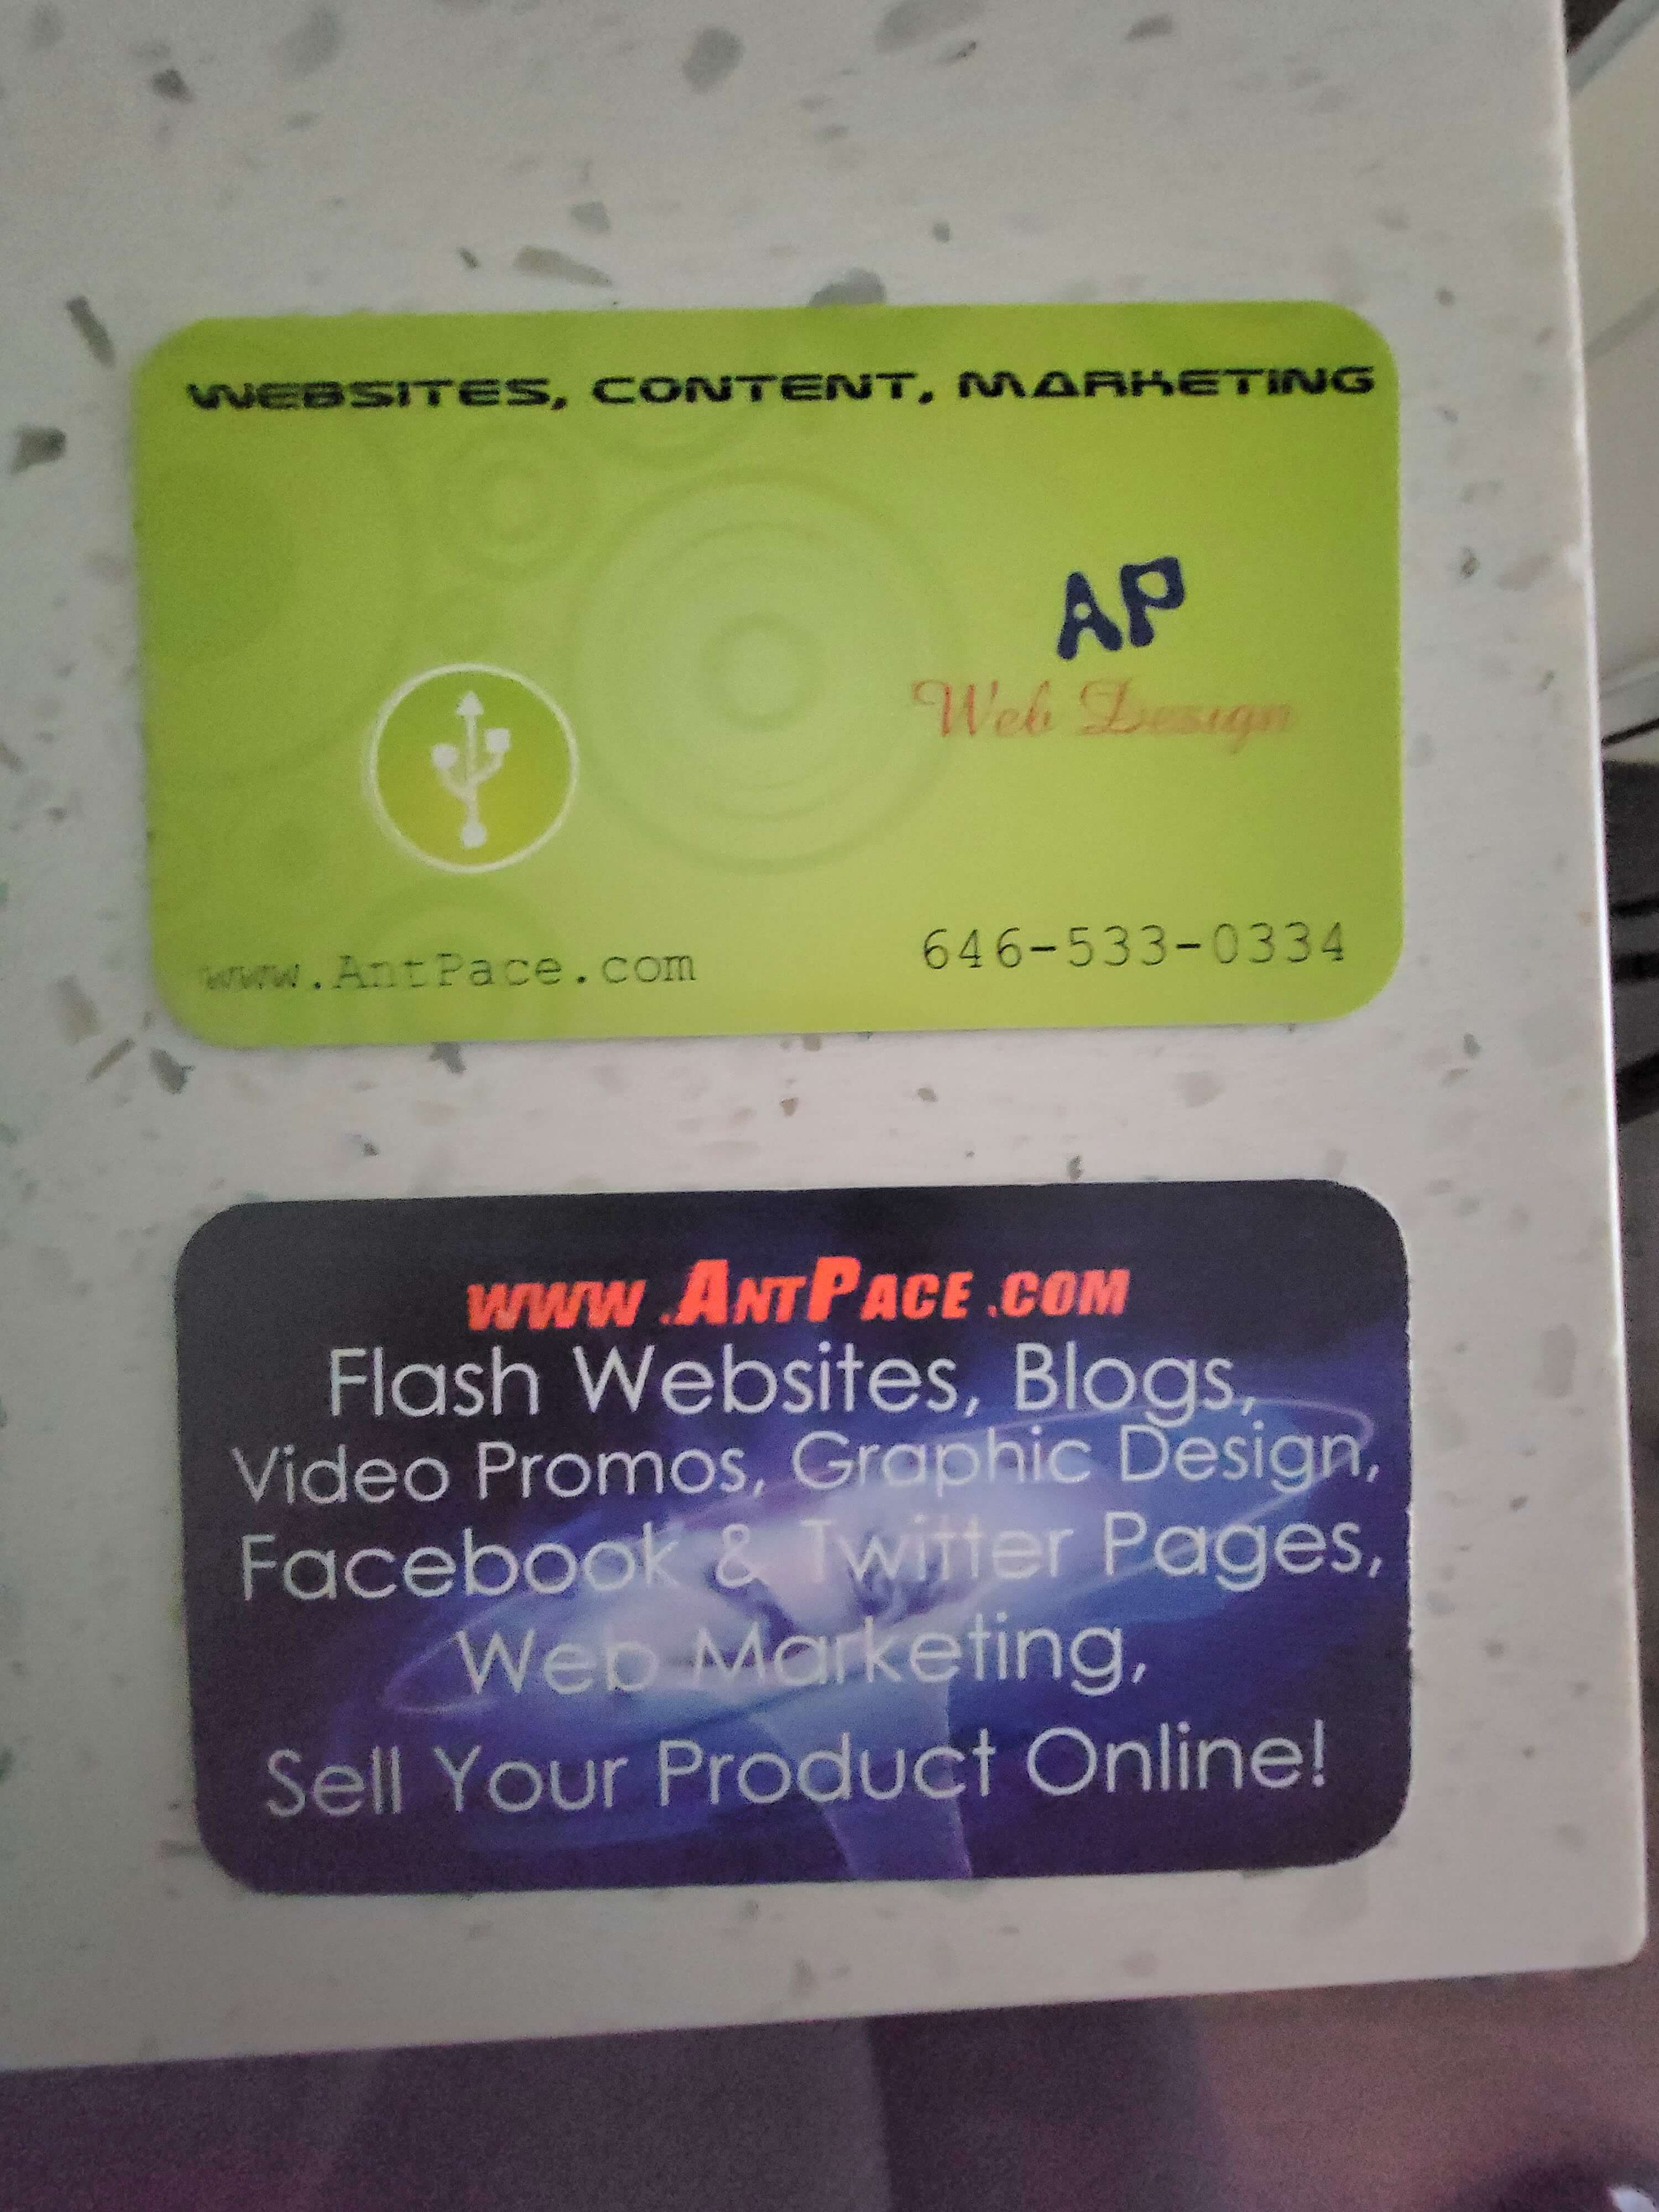 AntPace.com business cards from 2008